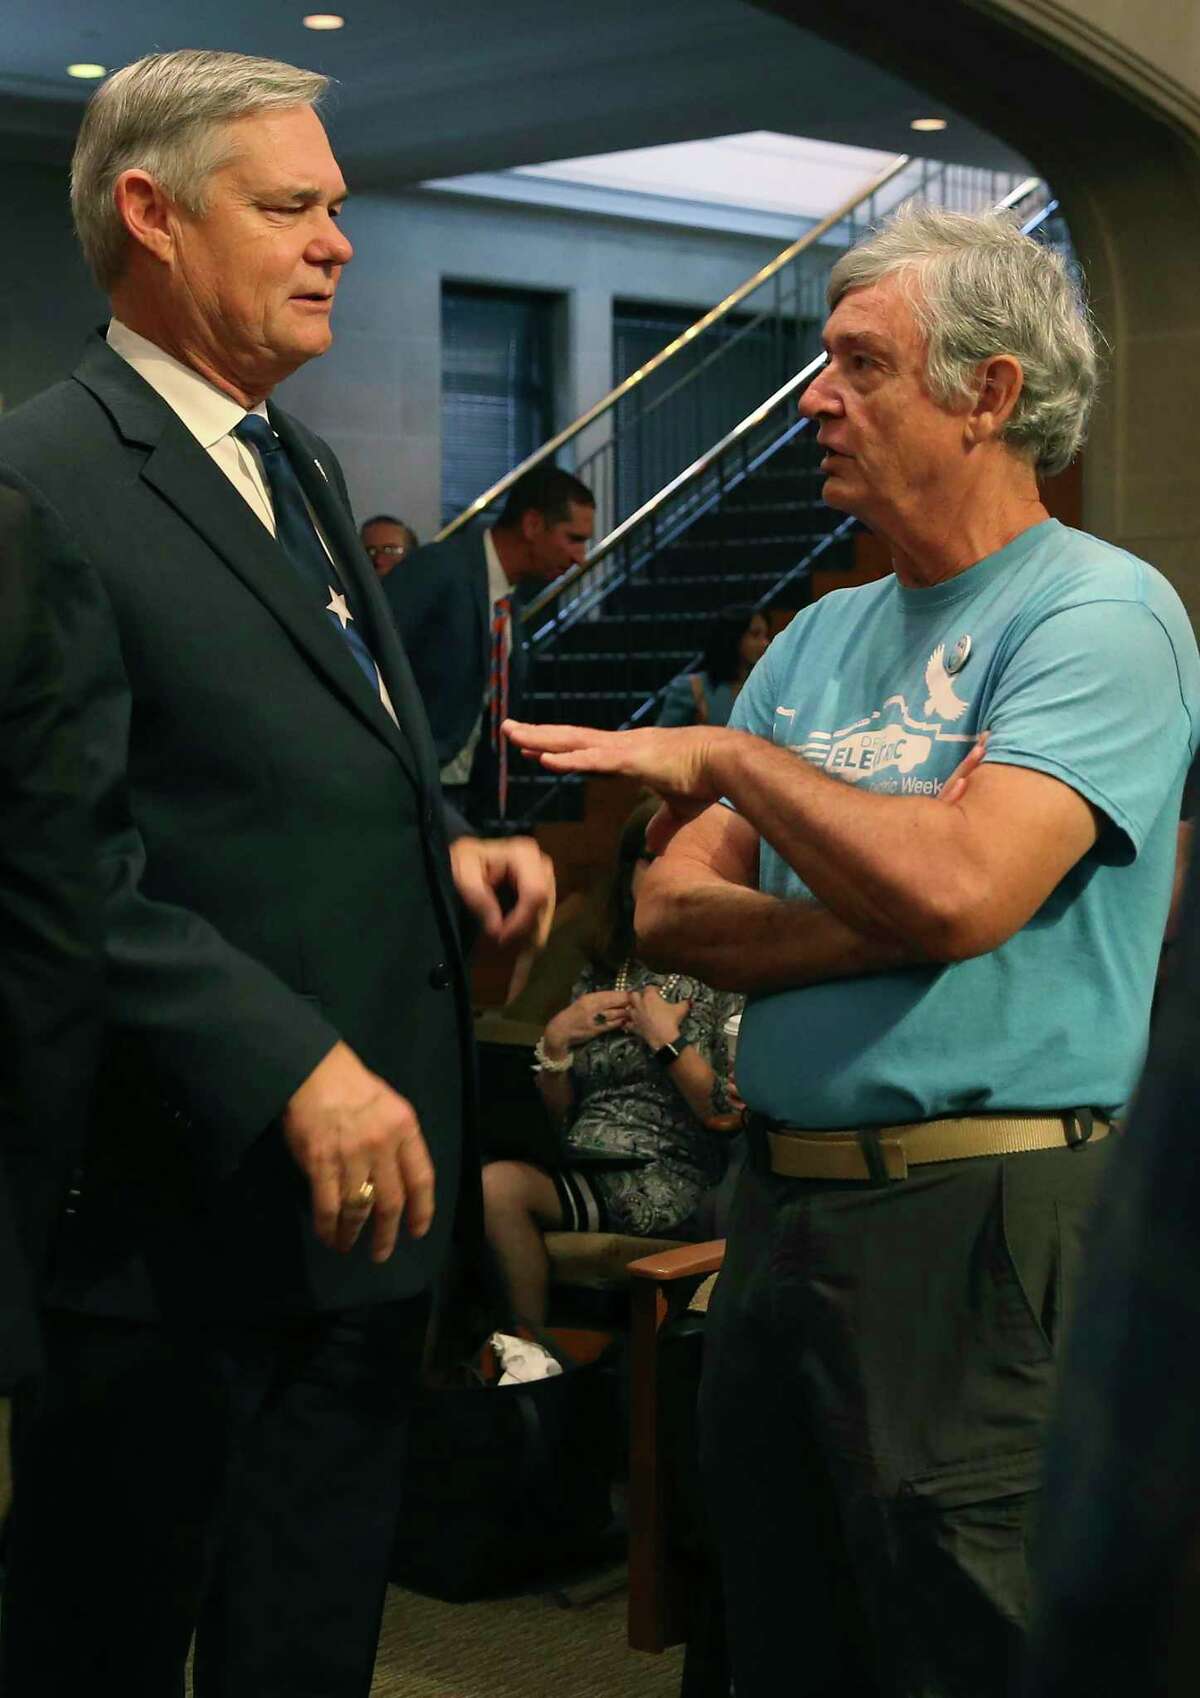 Climate Action and Adaptation Plan supporter Alan Montemayor, right, speaks with San Antonio City Council District 10 member Clayton Perry before the start of the council’s regular meeting, Thursday, Oct. 17, 2019. The council voted 10-1 to pass the plan. Perry was the lone vote against it.